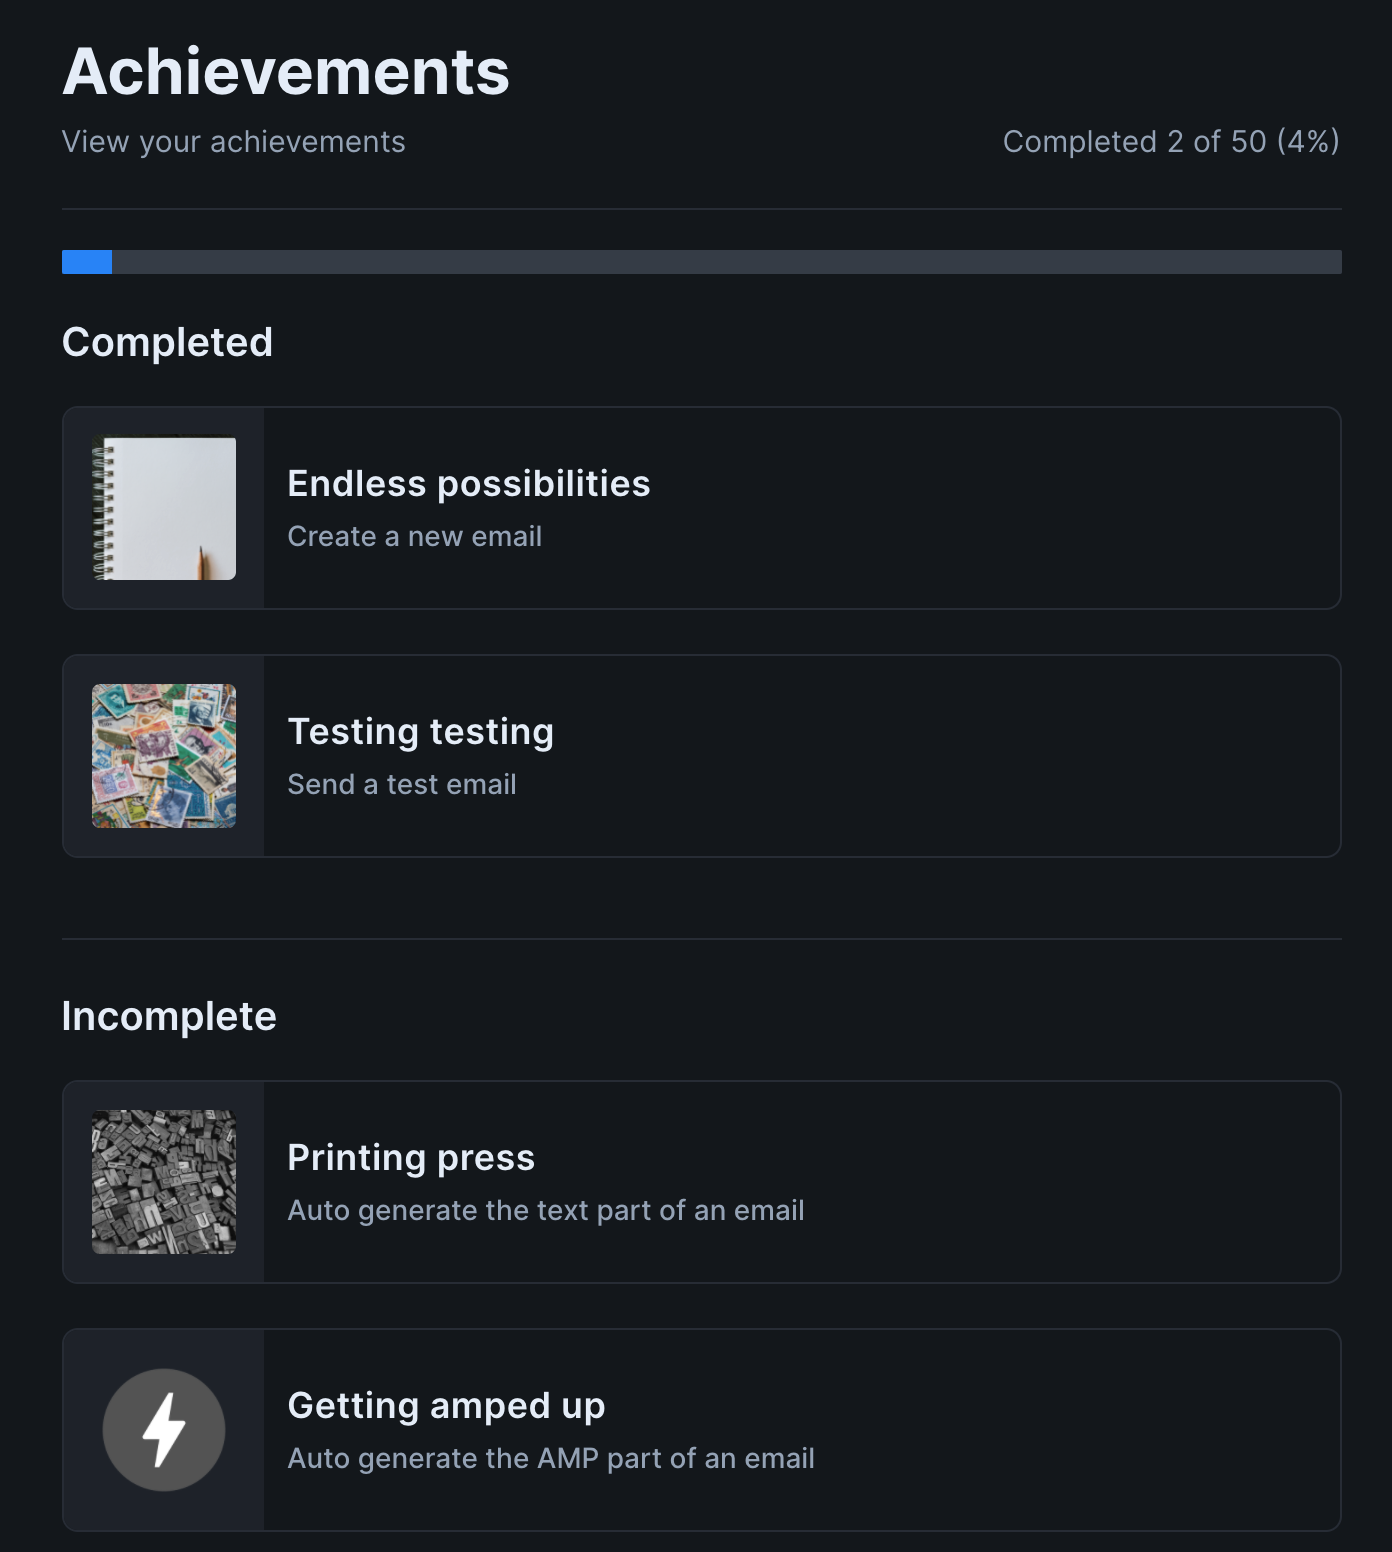 Image of a portion of the Achievements page. At the top is a partially completed progress bar and the text "Completed 2 of 50 (4%)". Below is a section titled "Completed", which contains two achievements. Each achievement has a title, description, and full color image. Below is a section titled "Incomplete", which contains two additional achievements. These achievements also have a title and description, but their image is grayscale.